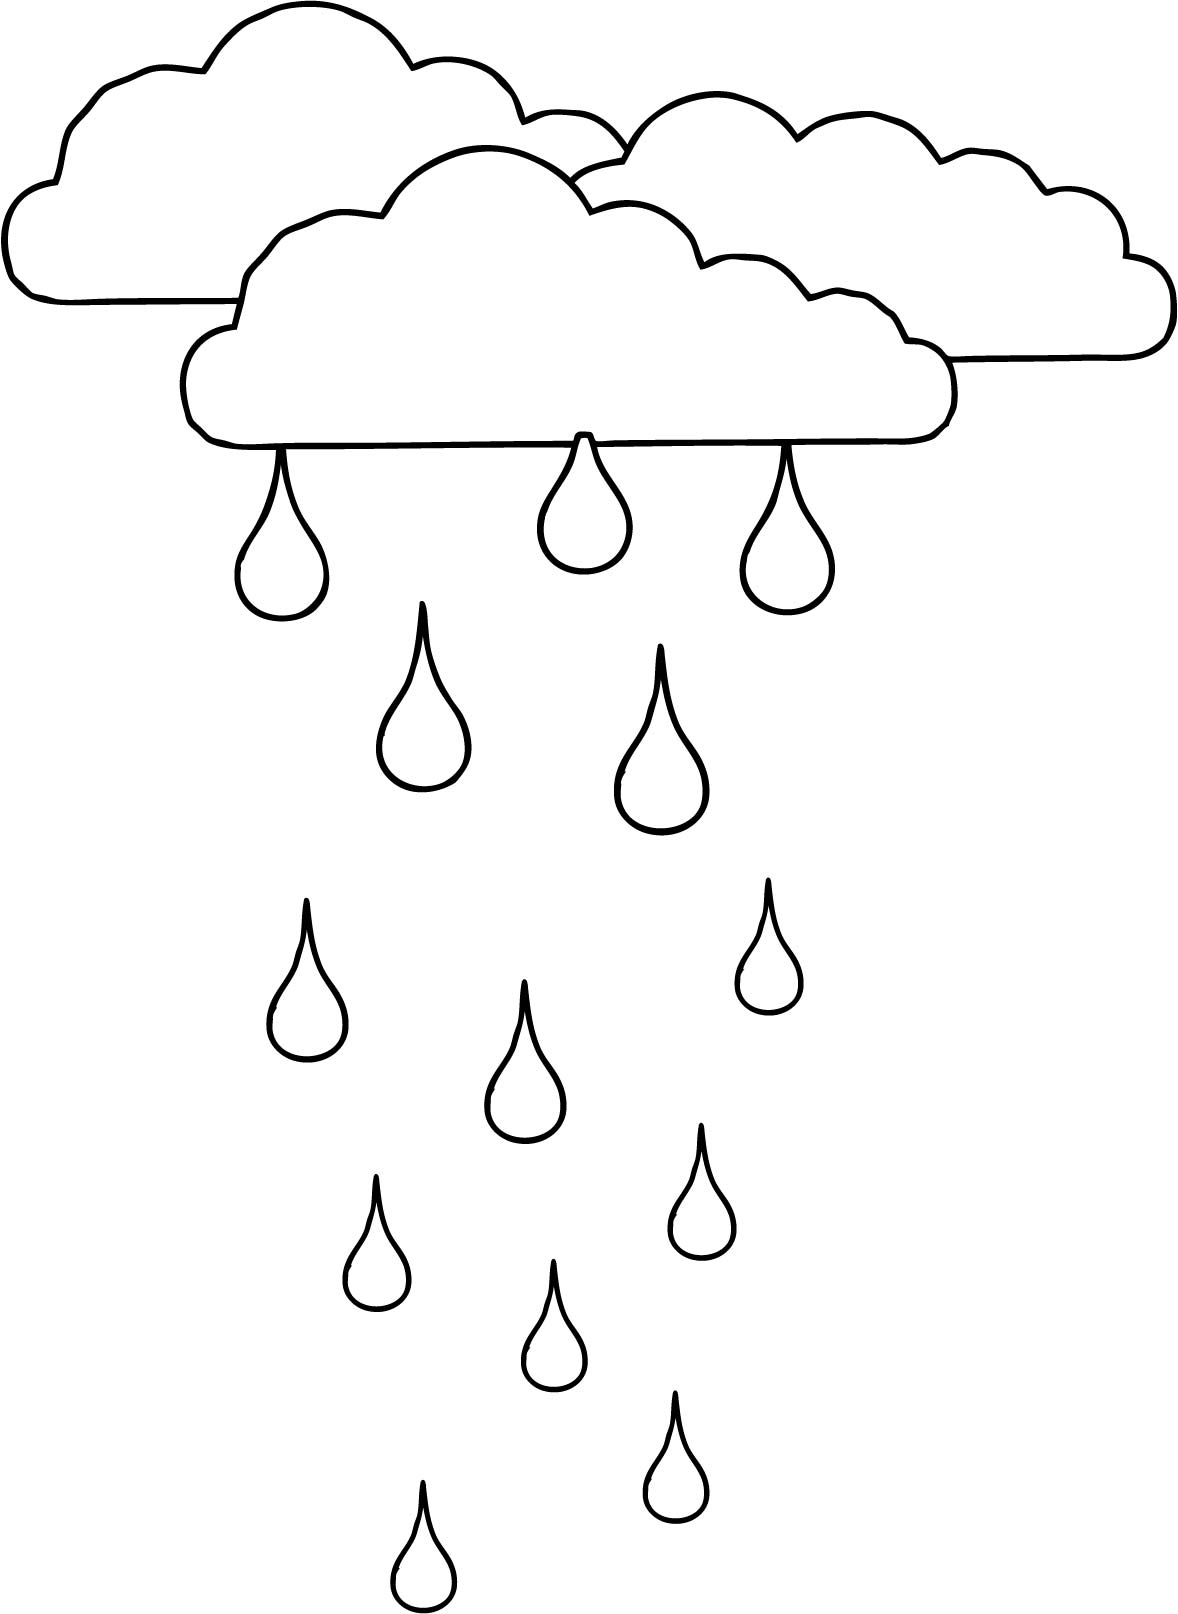 Raindrops Coloring Pages Printable Coloring Pages